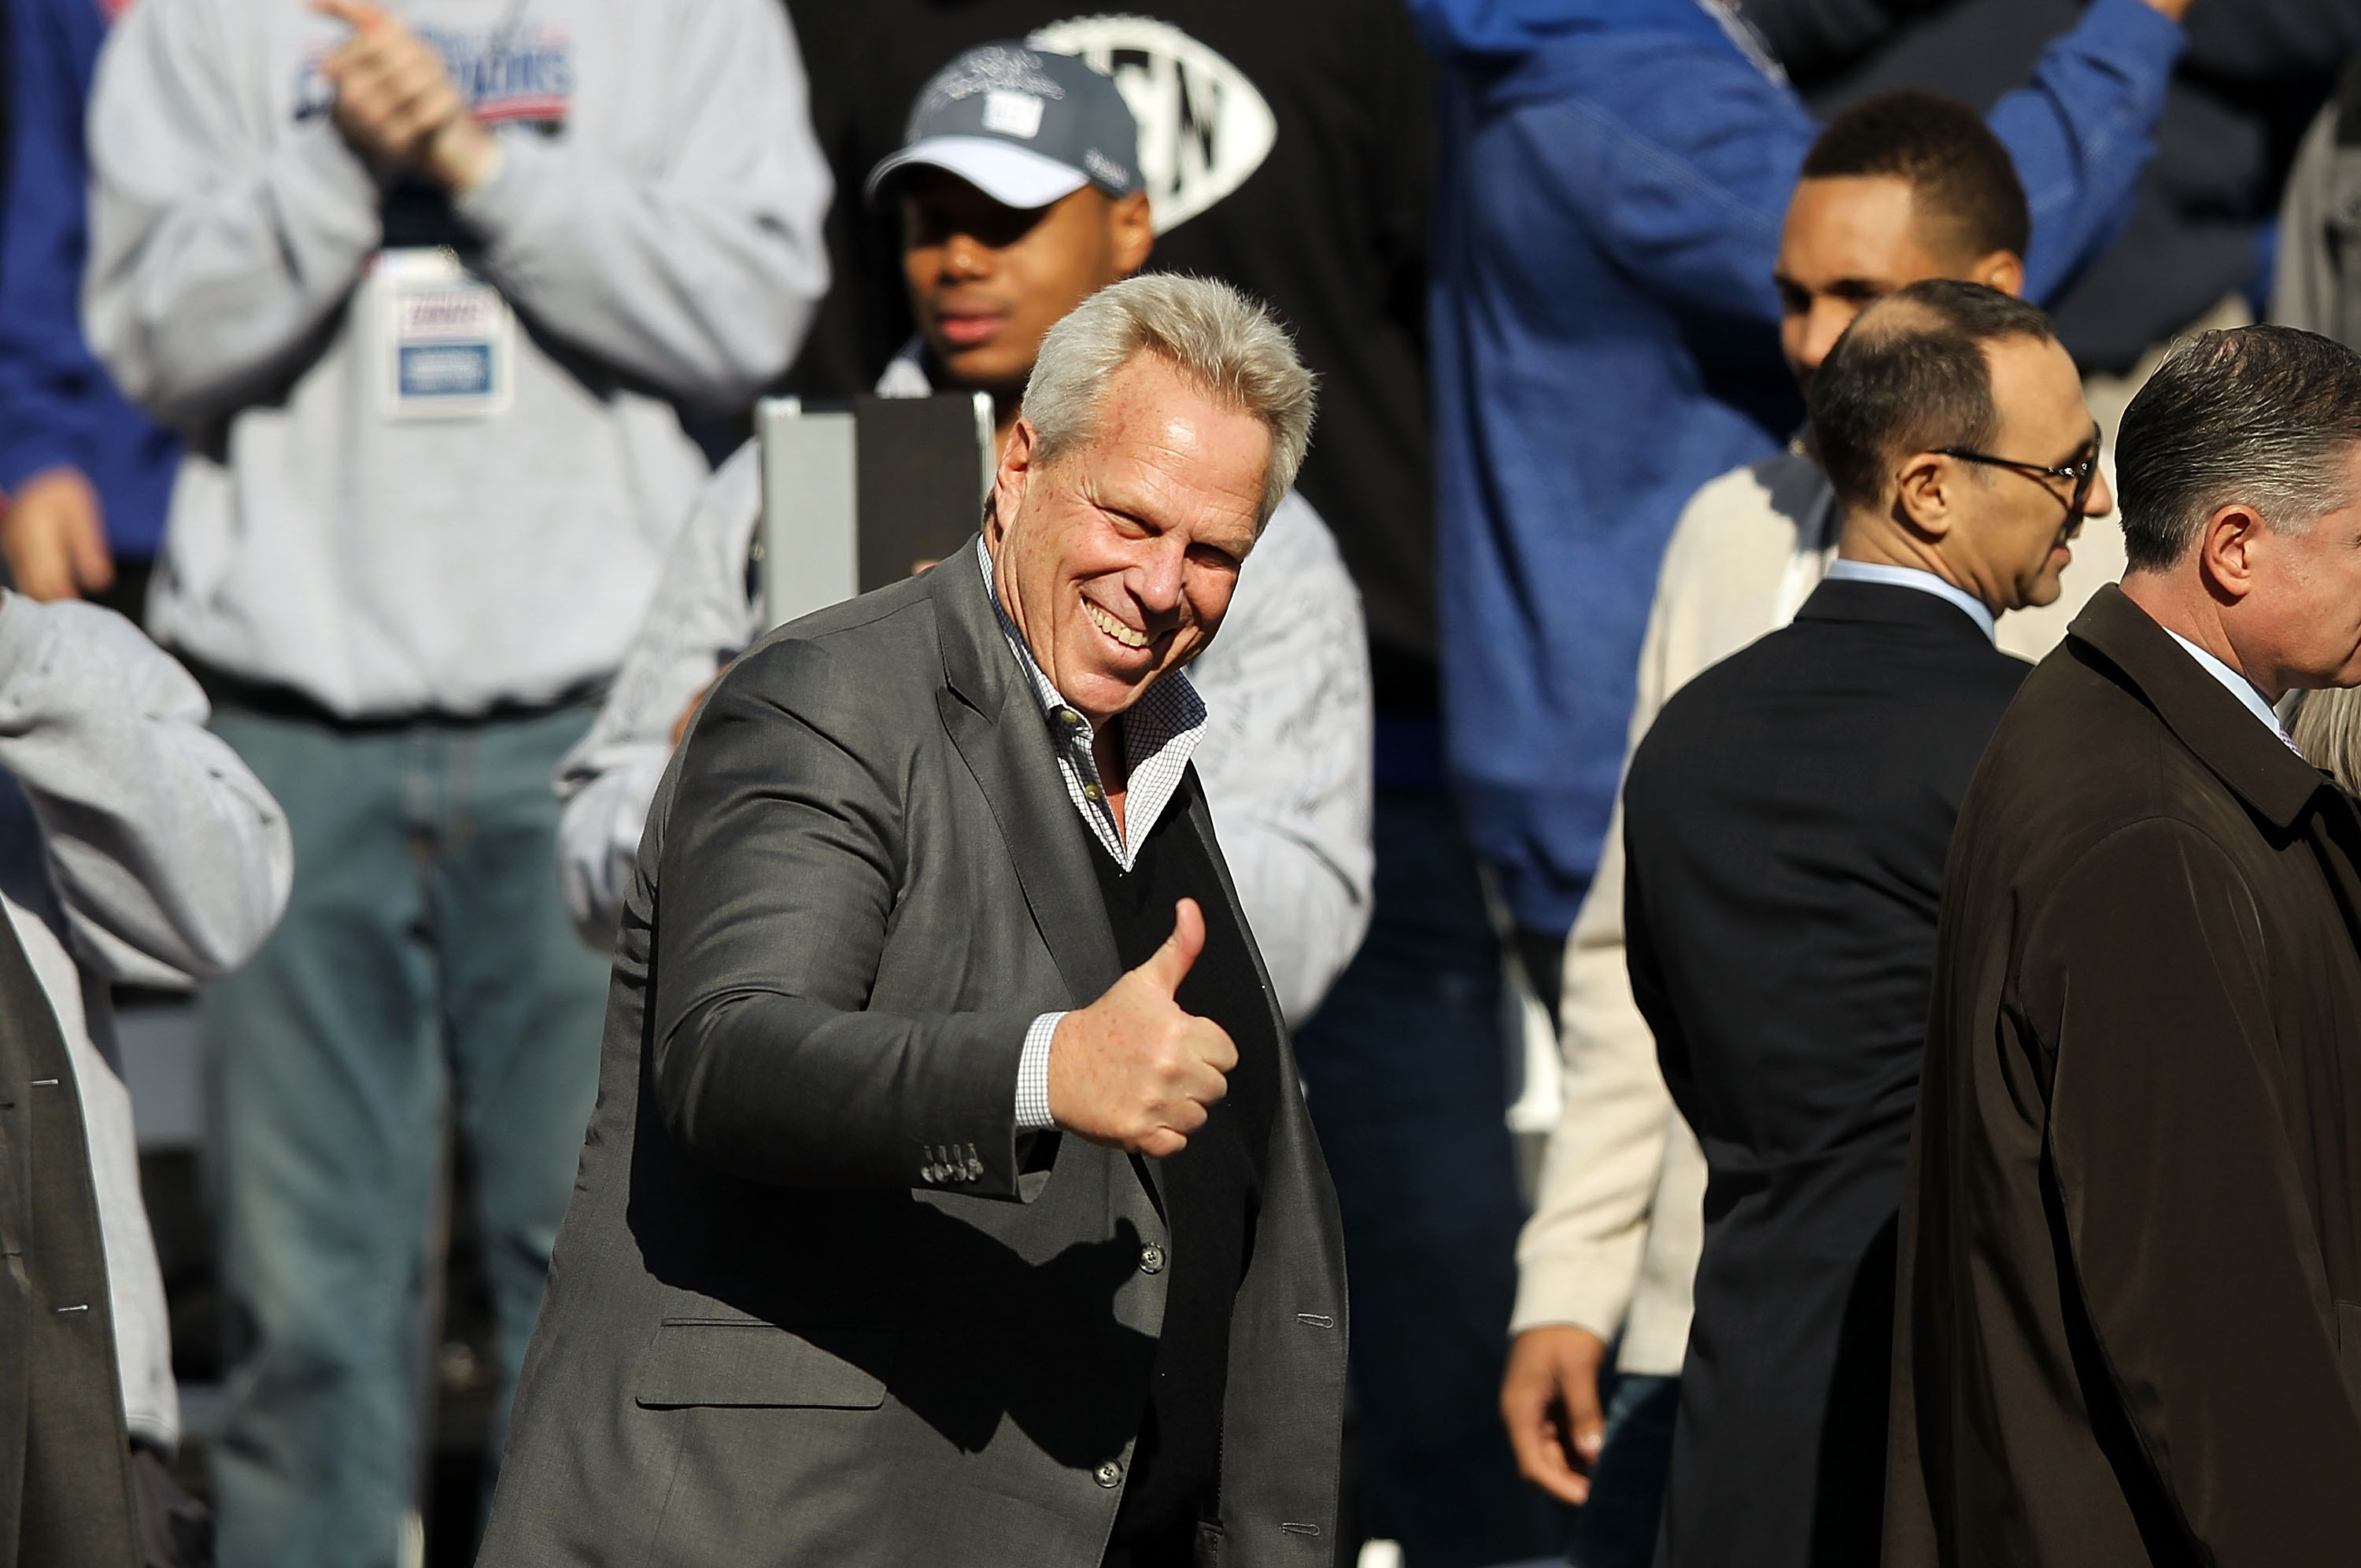 Giants Co-Owner Steve Tisch Is the Only Person in the World Who’s Won a Super Bowl and an Oscar